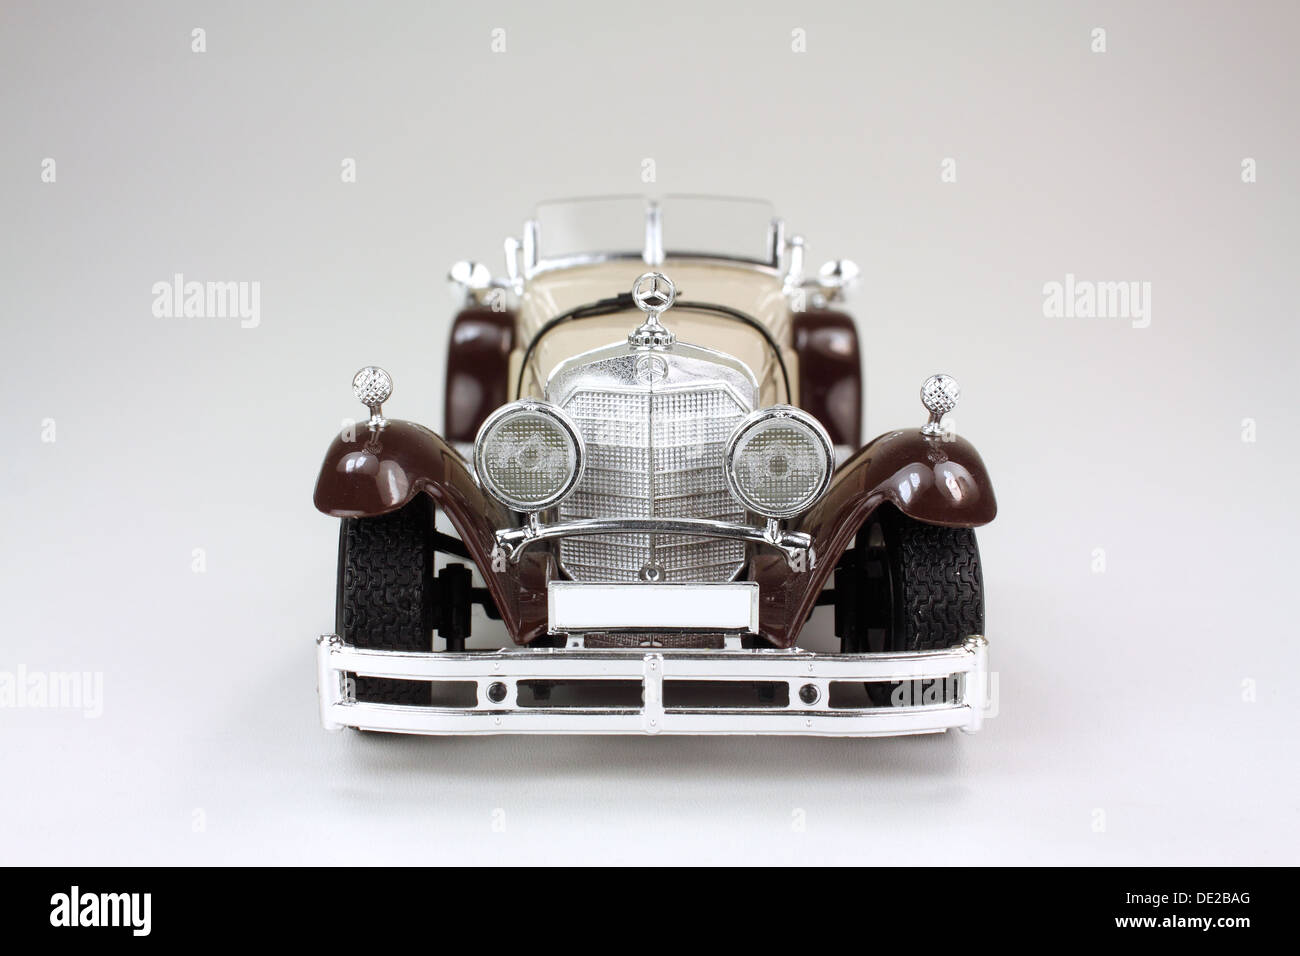 Model of a vintage Mercedes-Benz car on white background Stock Photo